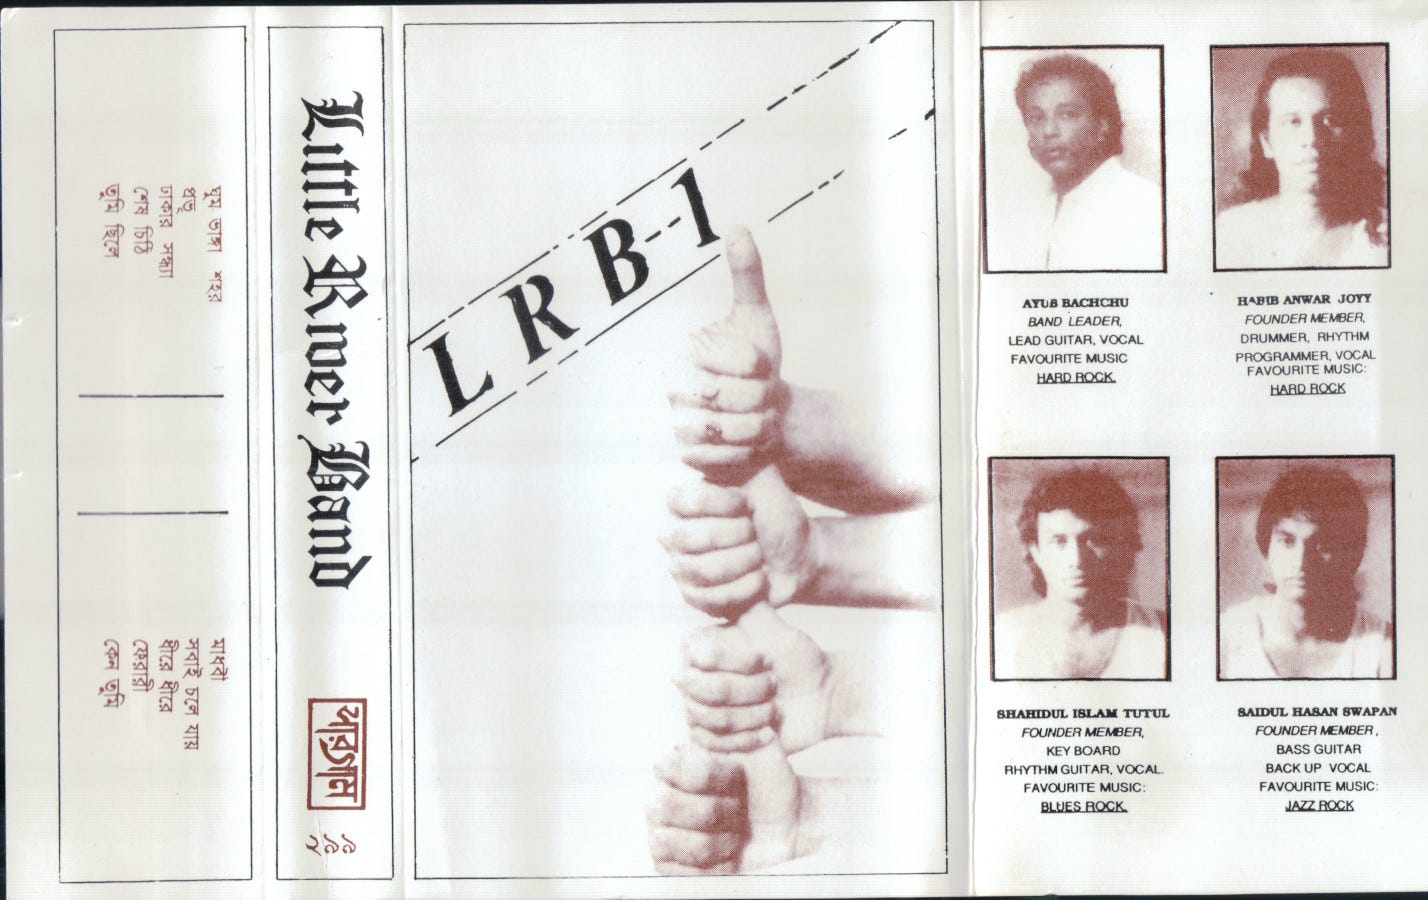 An image of The cover of the album "L R B - 1" which had a charm of its own and set itself apart with its use of minimalism - its sepia tones and photography